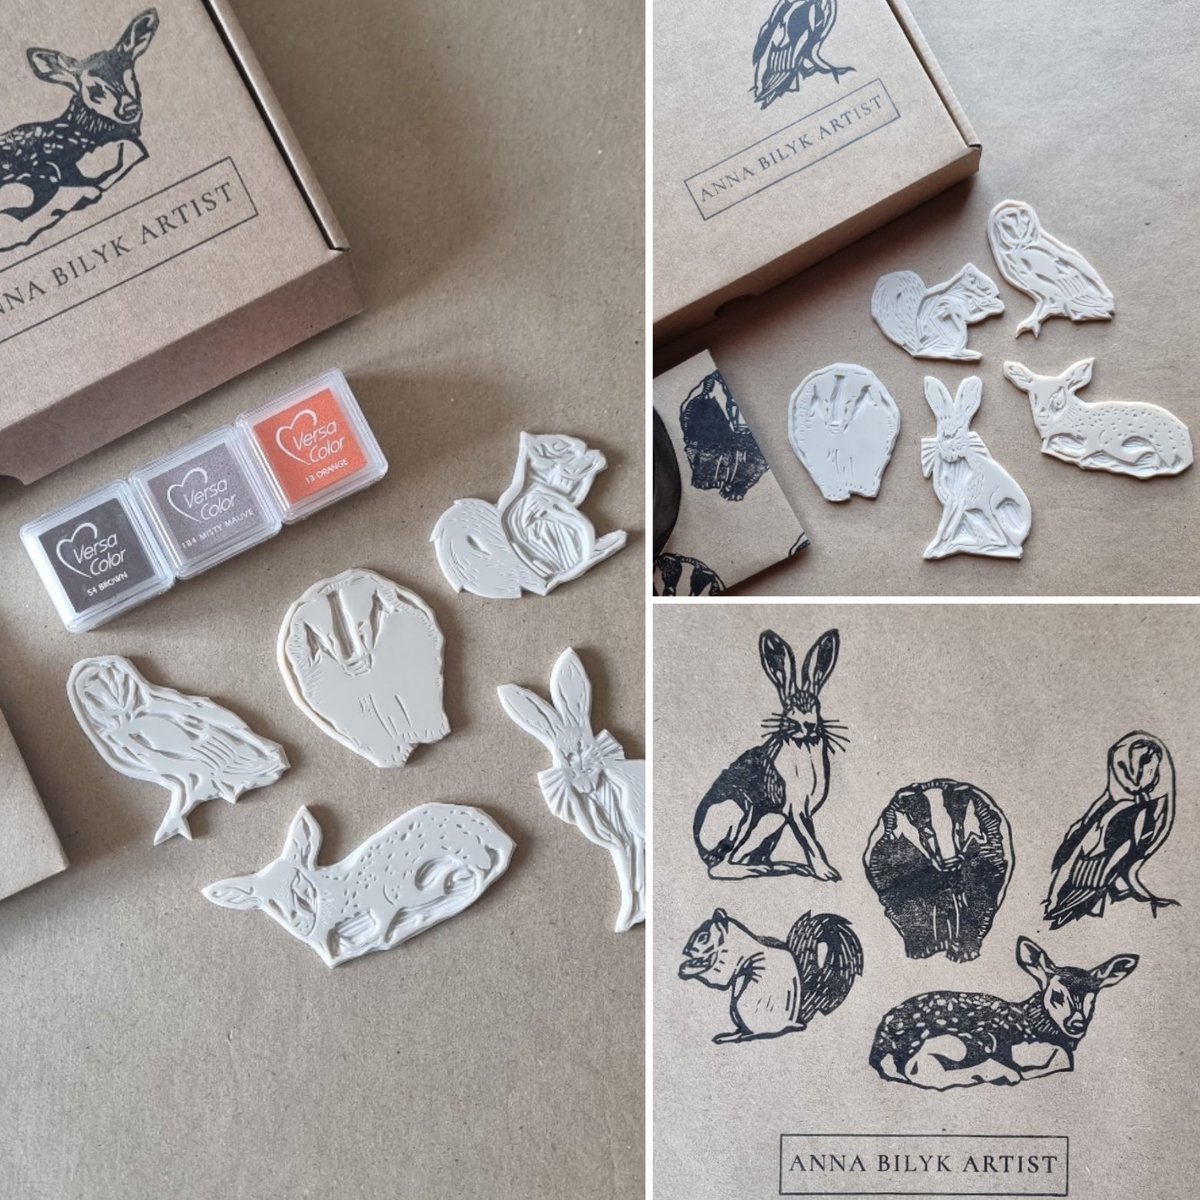 Morning - it's been far too long since last on !!! I'm in the middle of re-designing the Kits hopeful to get more out, here's the Woodland Kit 🖤 thebritishcrafthouse.co.uk/product/woodla… @BritishCrafting #EarlyBiz #shopindie #UKGiftHour #ukgiftam #stamps #journaling #scrapbooking